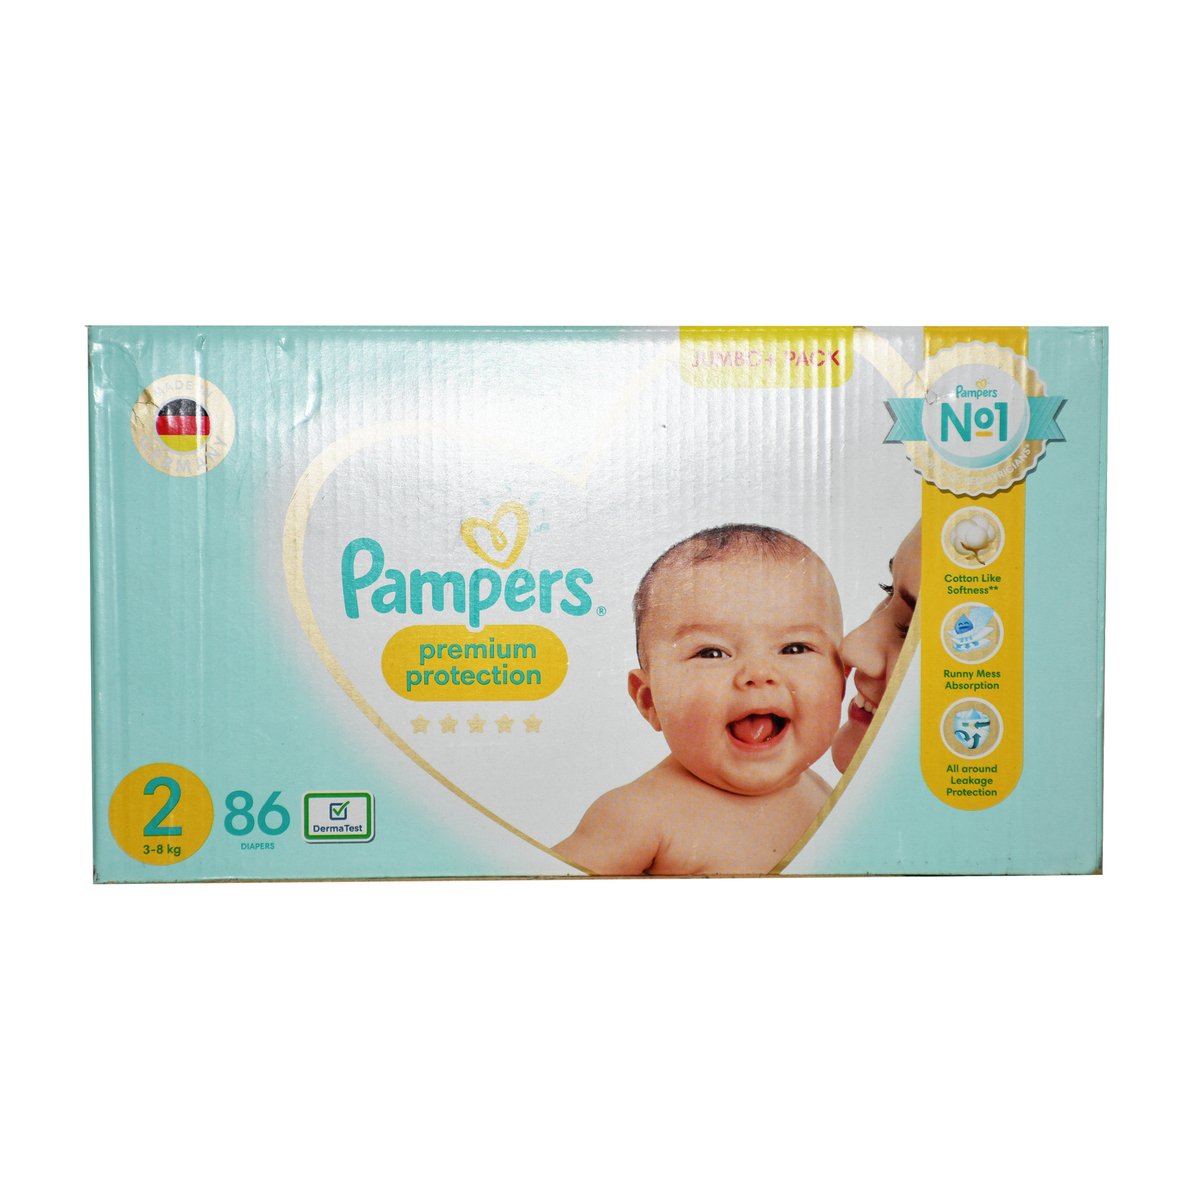 Pampers Premium Care New | Kuwait Lulu Best 4-8kg 86pcs at Price Baby Diapers Express Box Dry Online 2, Size | Delivery